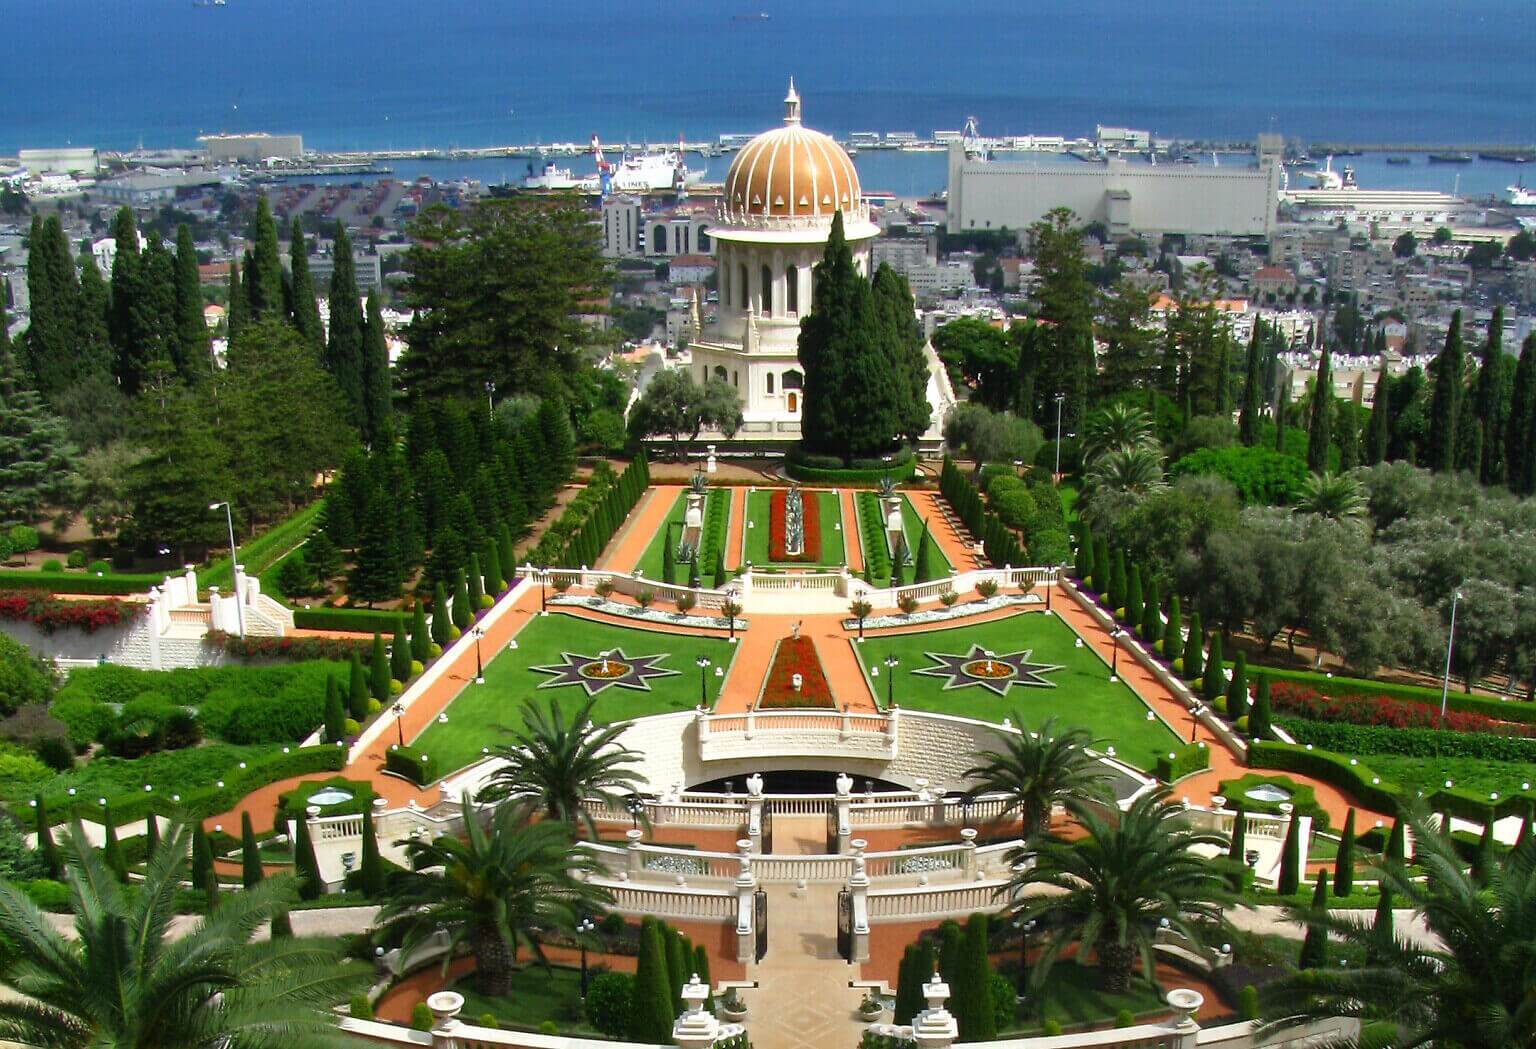 View of the Bahai Gardens terraces in Haifa IMAGE SOURCE: GETTY IMAGES